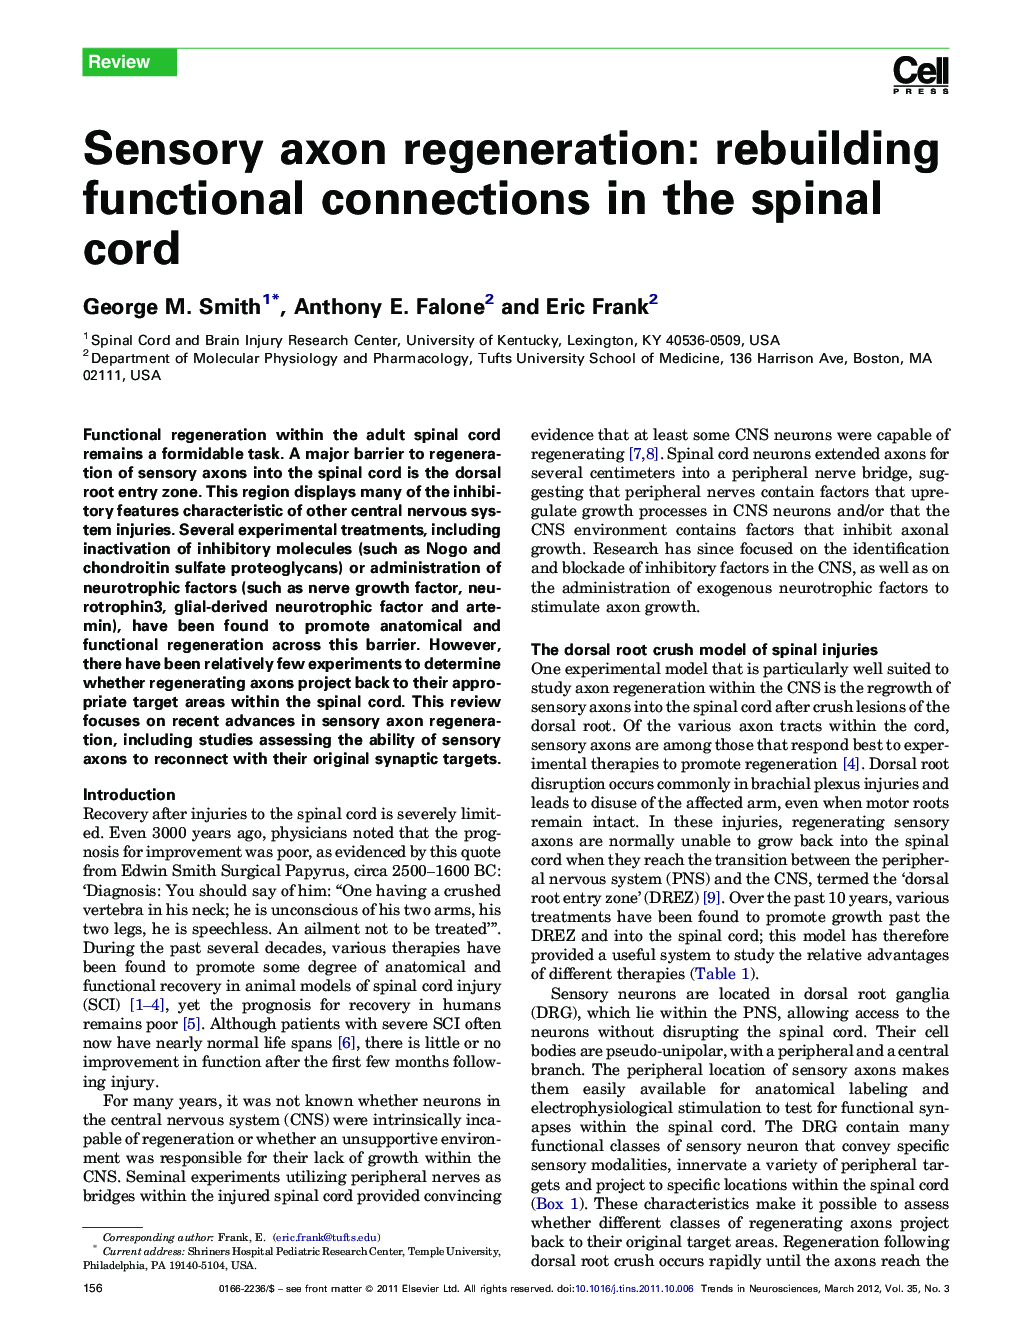 Sensory axon regeneration: rebuilding functional connections in the spinal cord